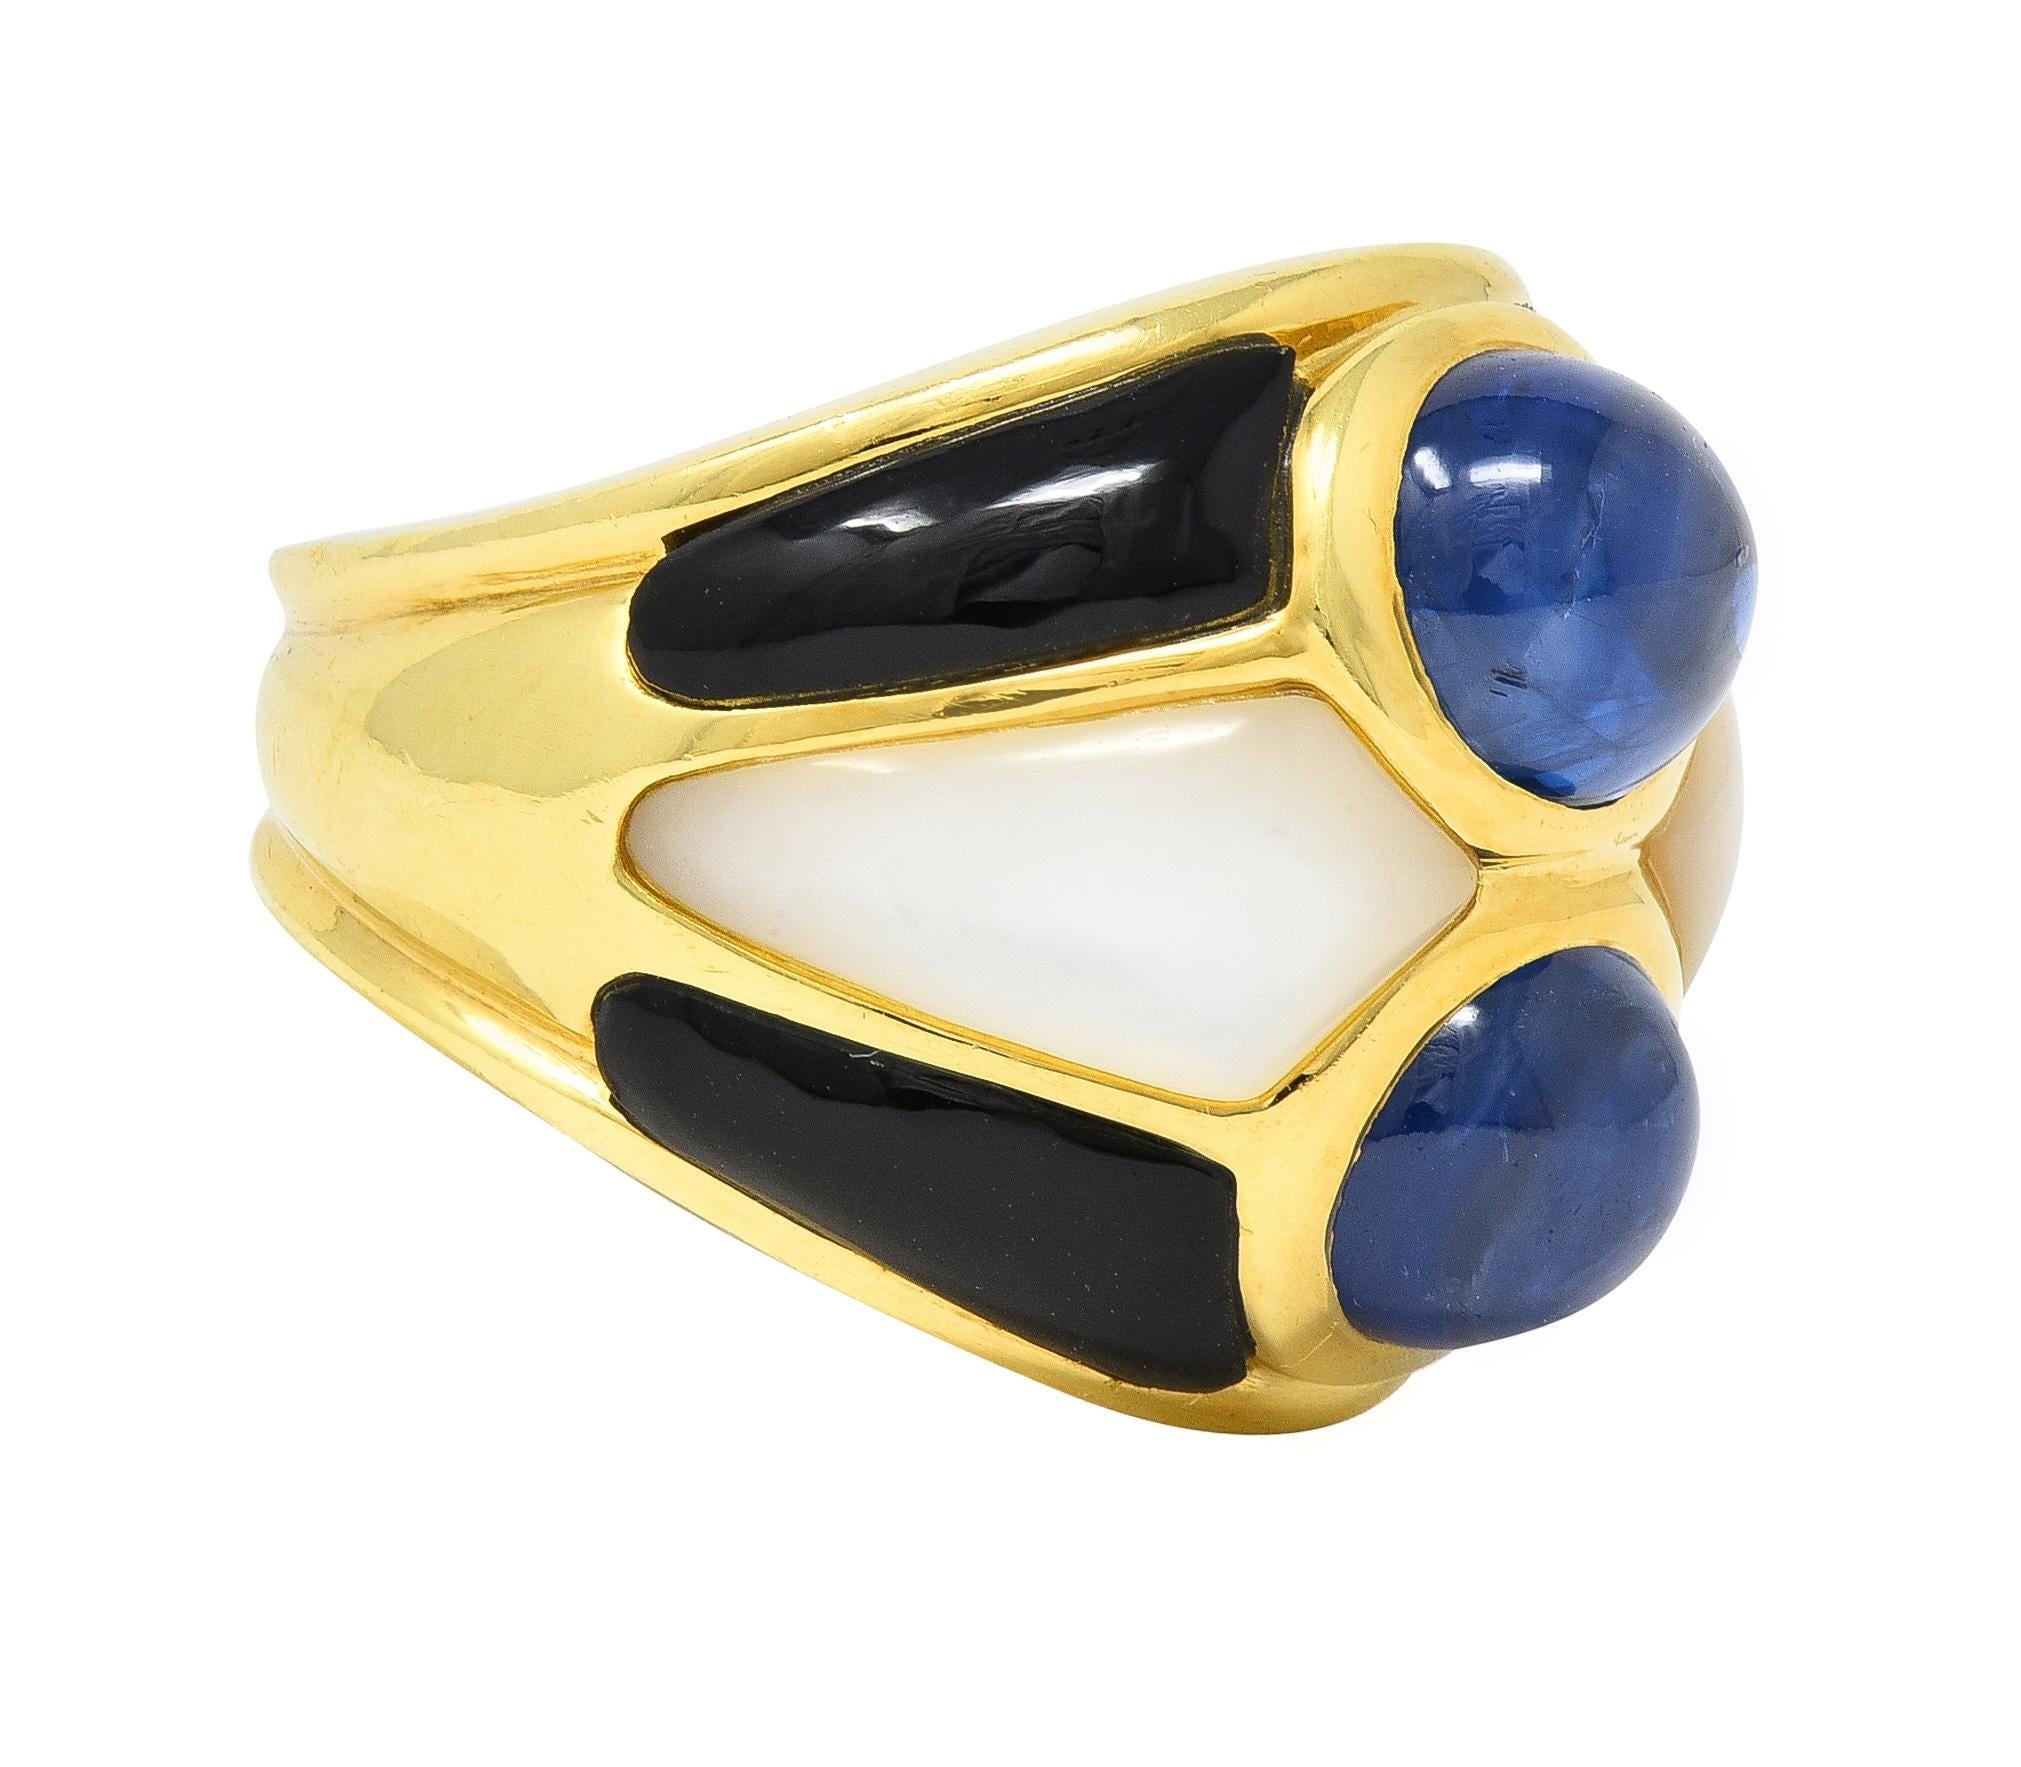 Featuring two oval-shaped sapphire cabochons bezel set north to south 
Weighing approximately 8.80 carats total - translucent medium blue
With geometric motif segmented pattern surround 
Inlaid with onyx and mother-of-pearl cabochons
Opaque black